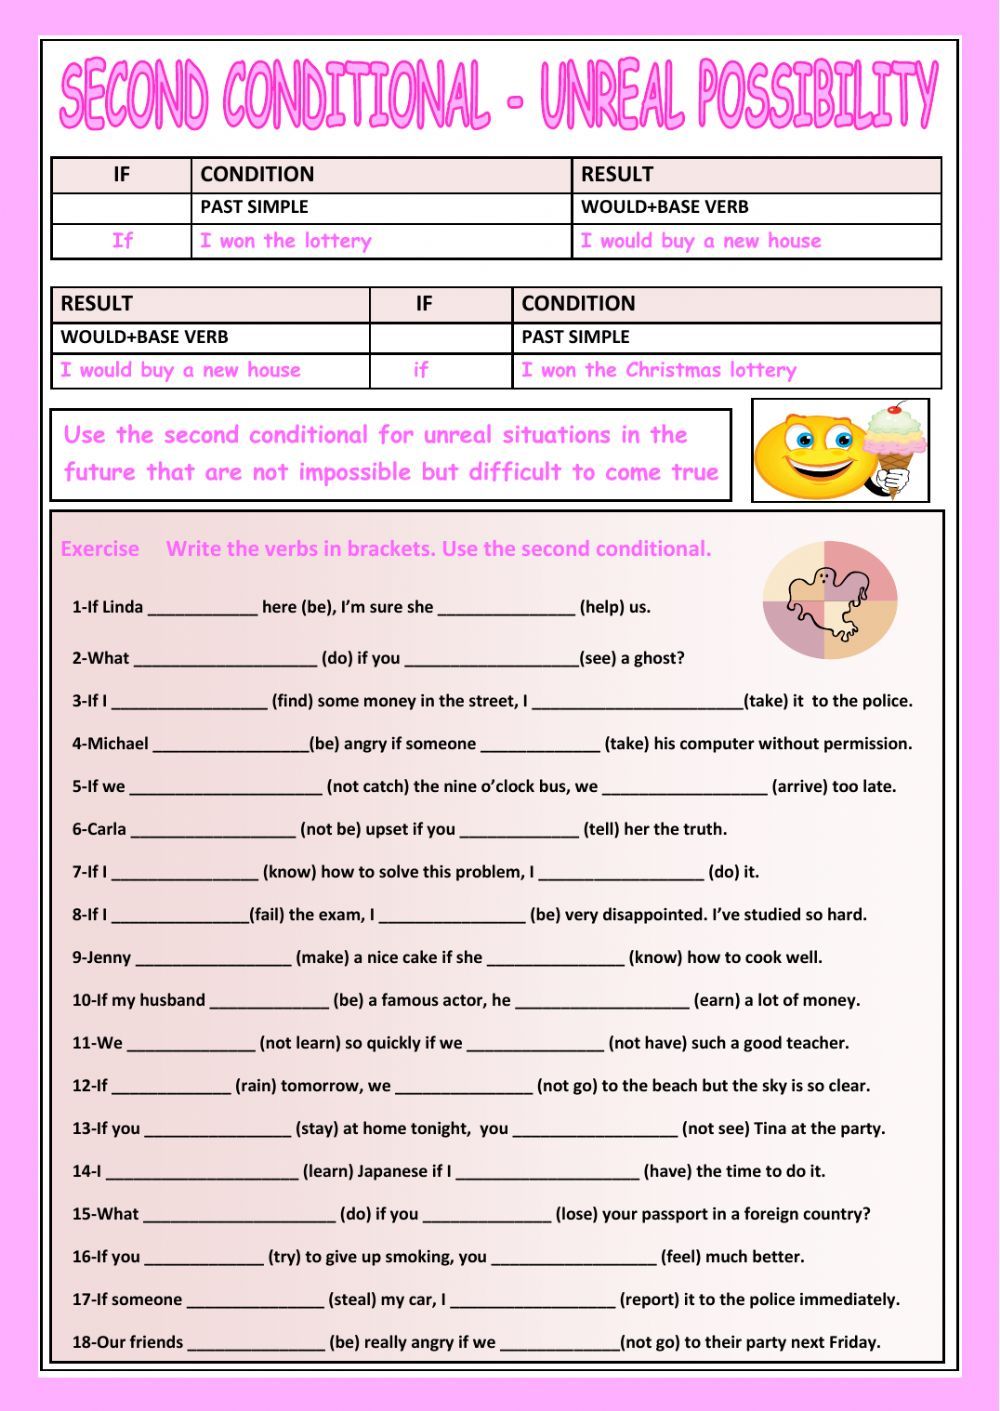 Second Conditional Worksheet Pdf